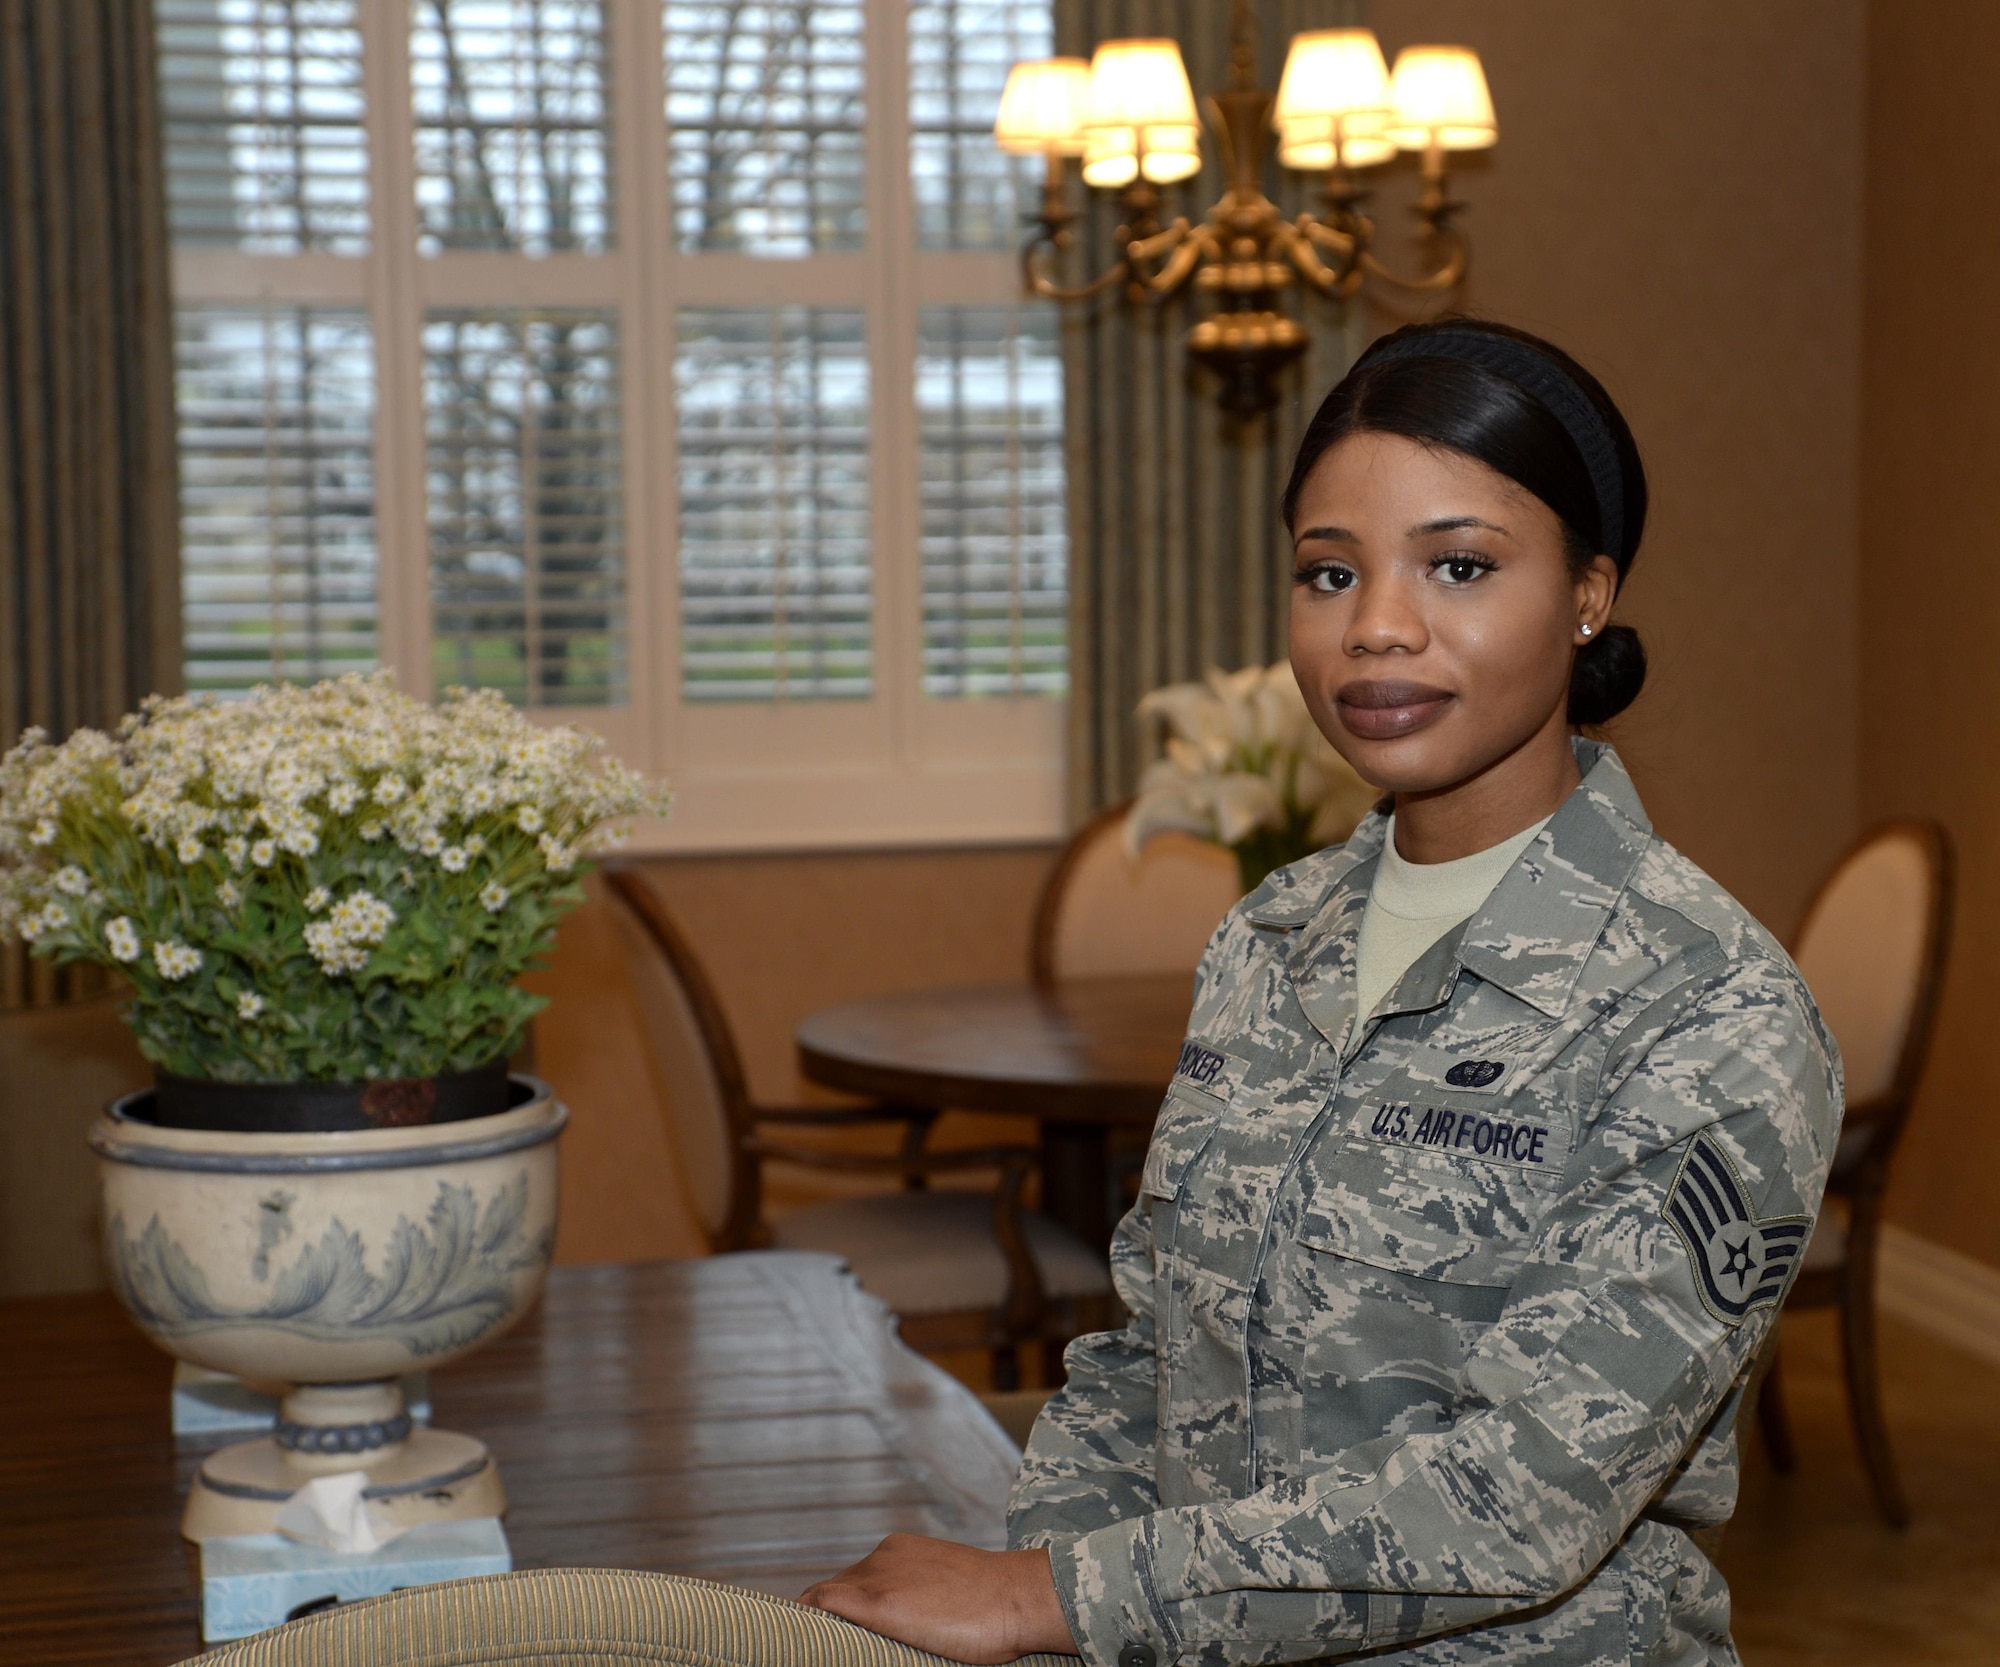 Staff Sgt. Isata Tucker, a manager on duty at the Fisher House for Families of the Fallen, Dover Air Force Base, Del., manages the facility on Dec. 12, 2016, ensuring that the property is always ready for use. Staff Sgt. Tucker survived a war in her former country of Sierra Leone, Africa. She recieved her U.S. citizenship on the same day she graduated from Air Force Basic Military Training in 2013.